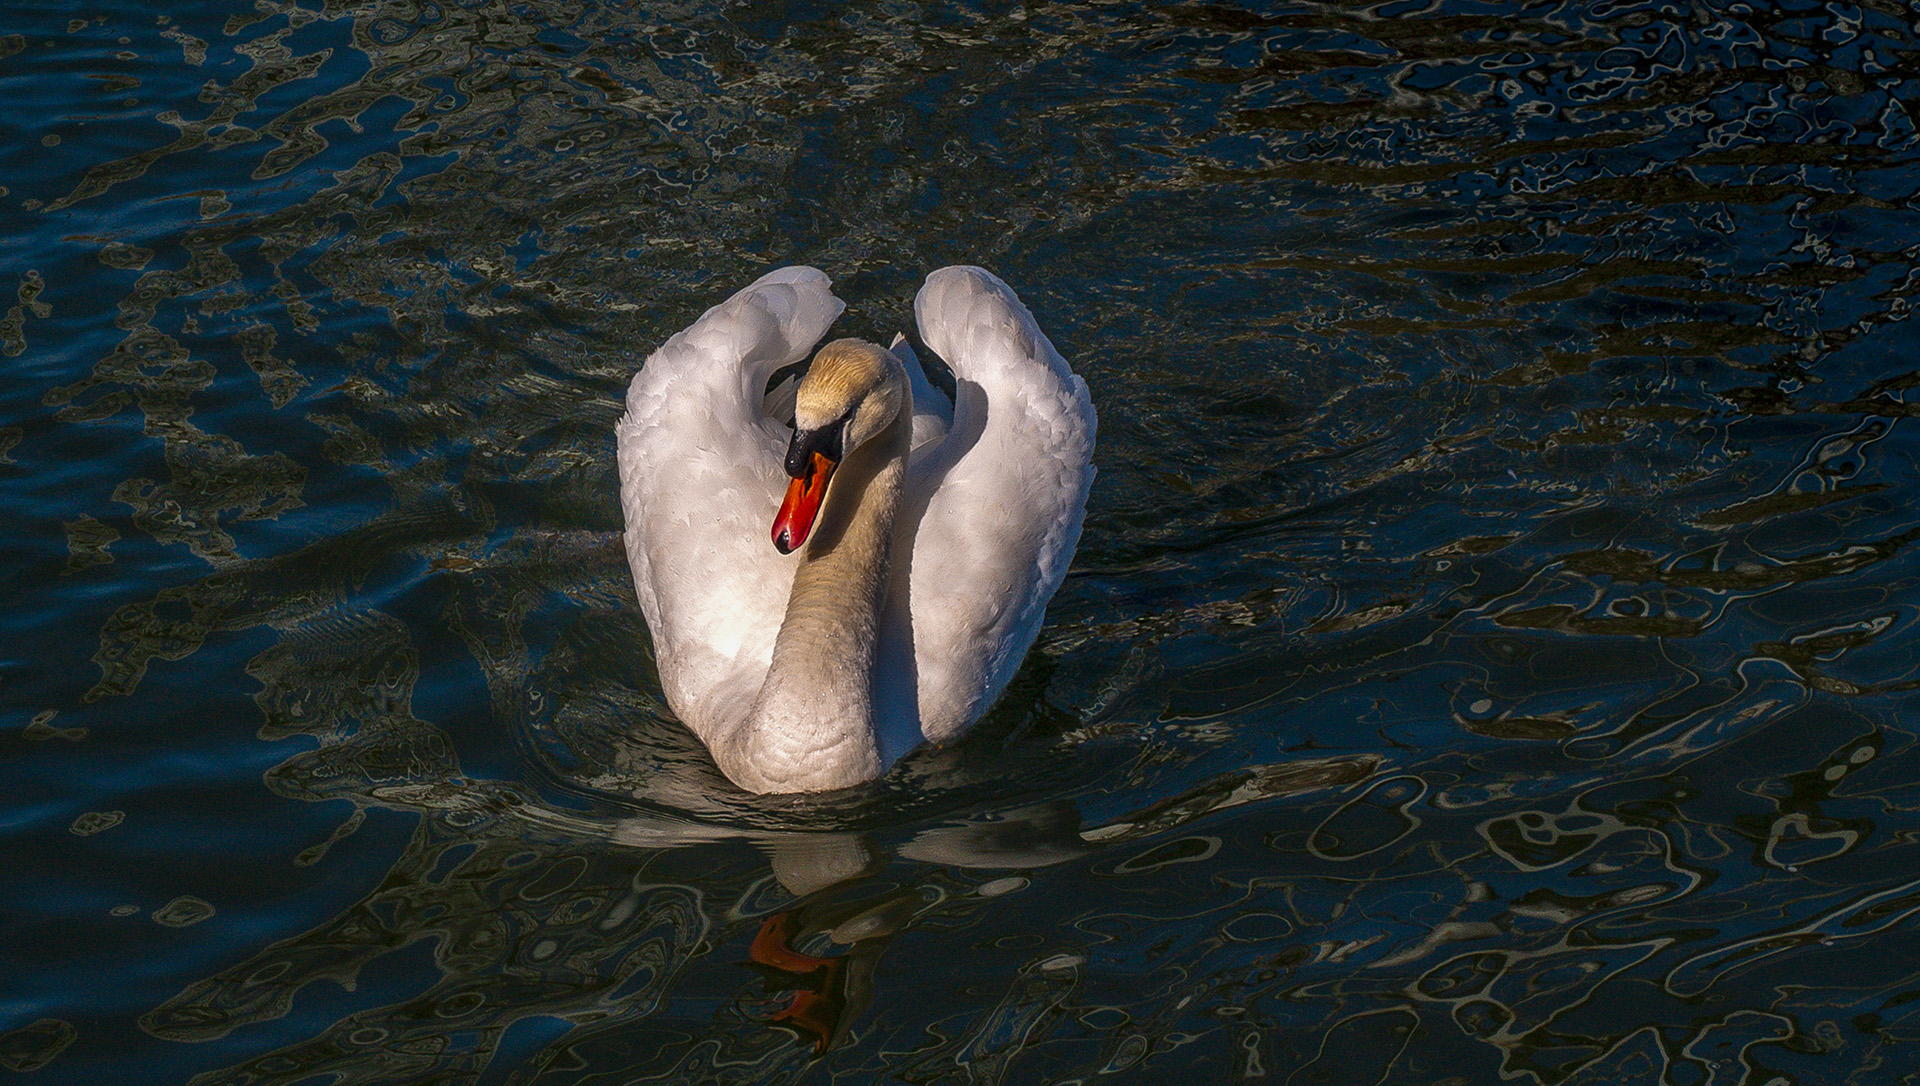 Swan in the River Thames at Henley-on-thames